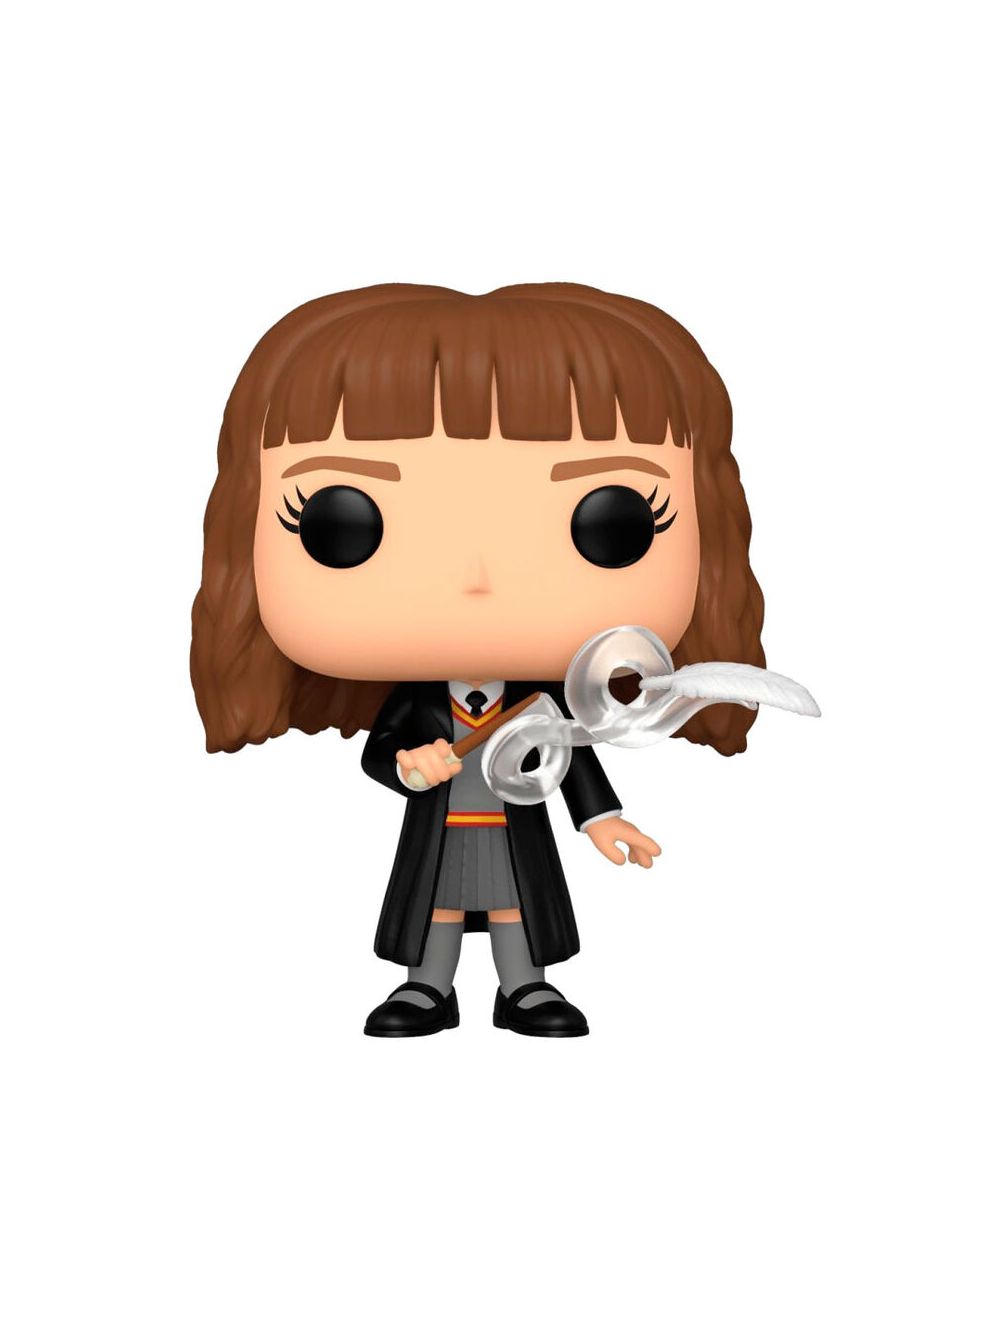 Funko POP! Harry Potter Hermione with Feather figura 10cm